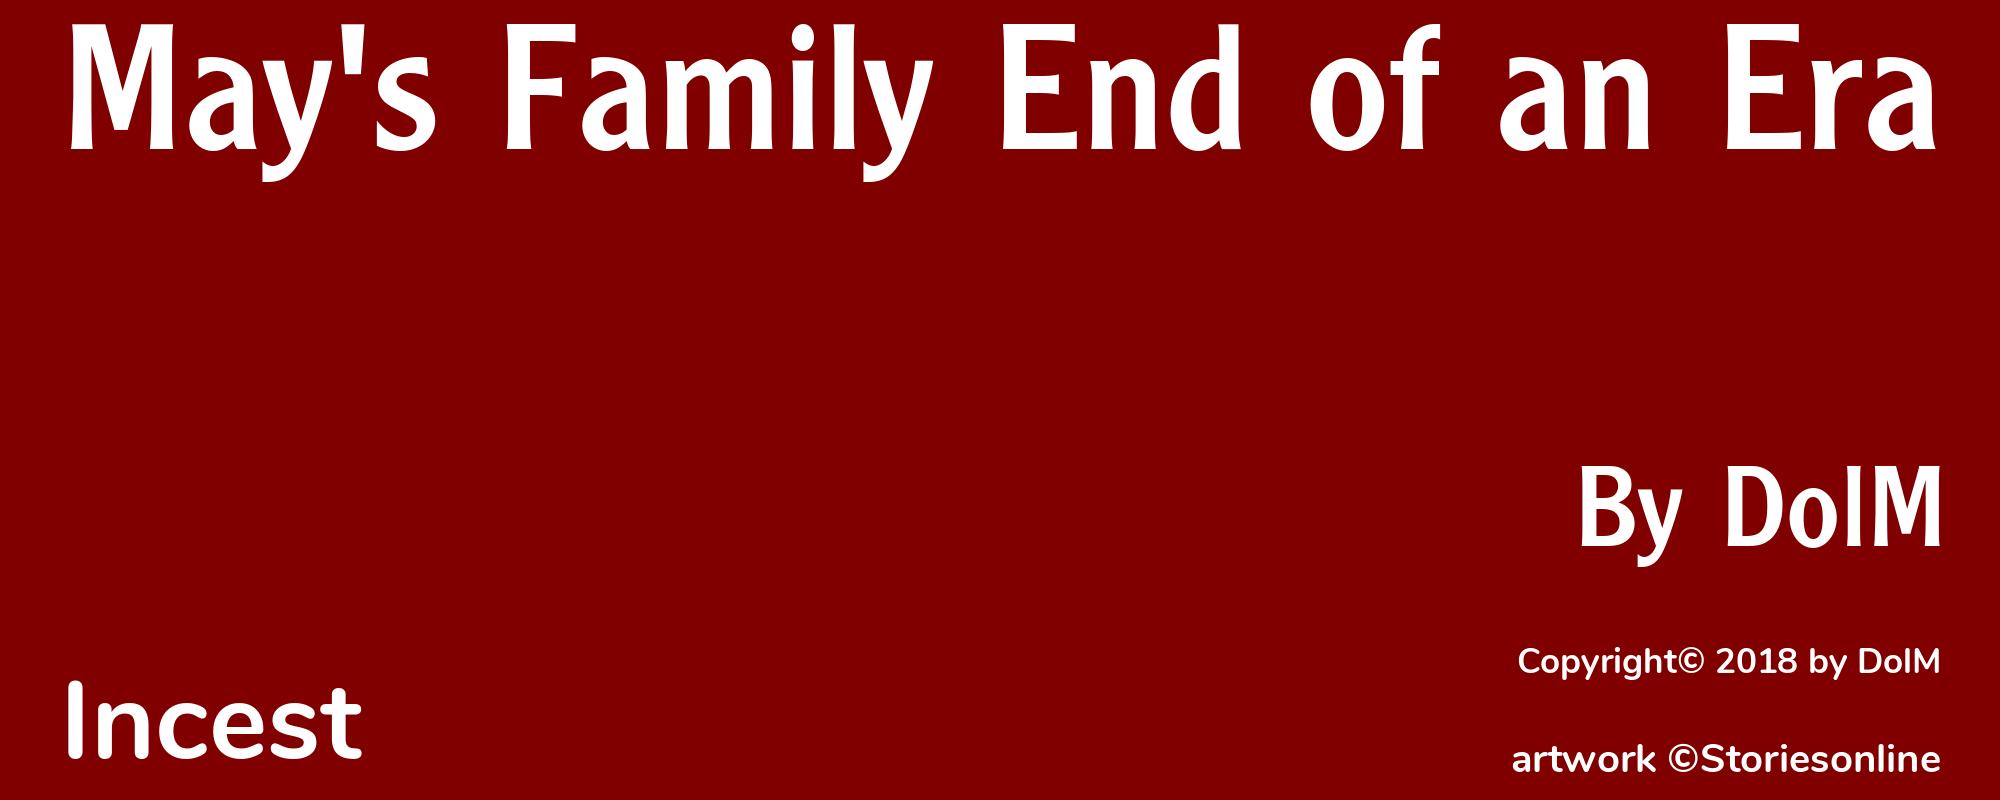 May's Family End of an Era - Cover